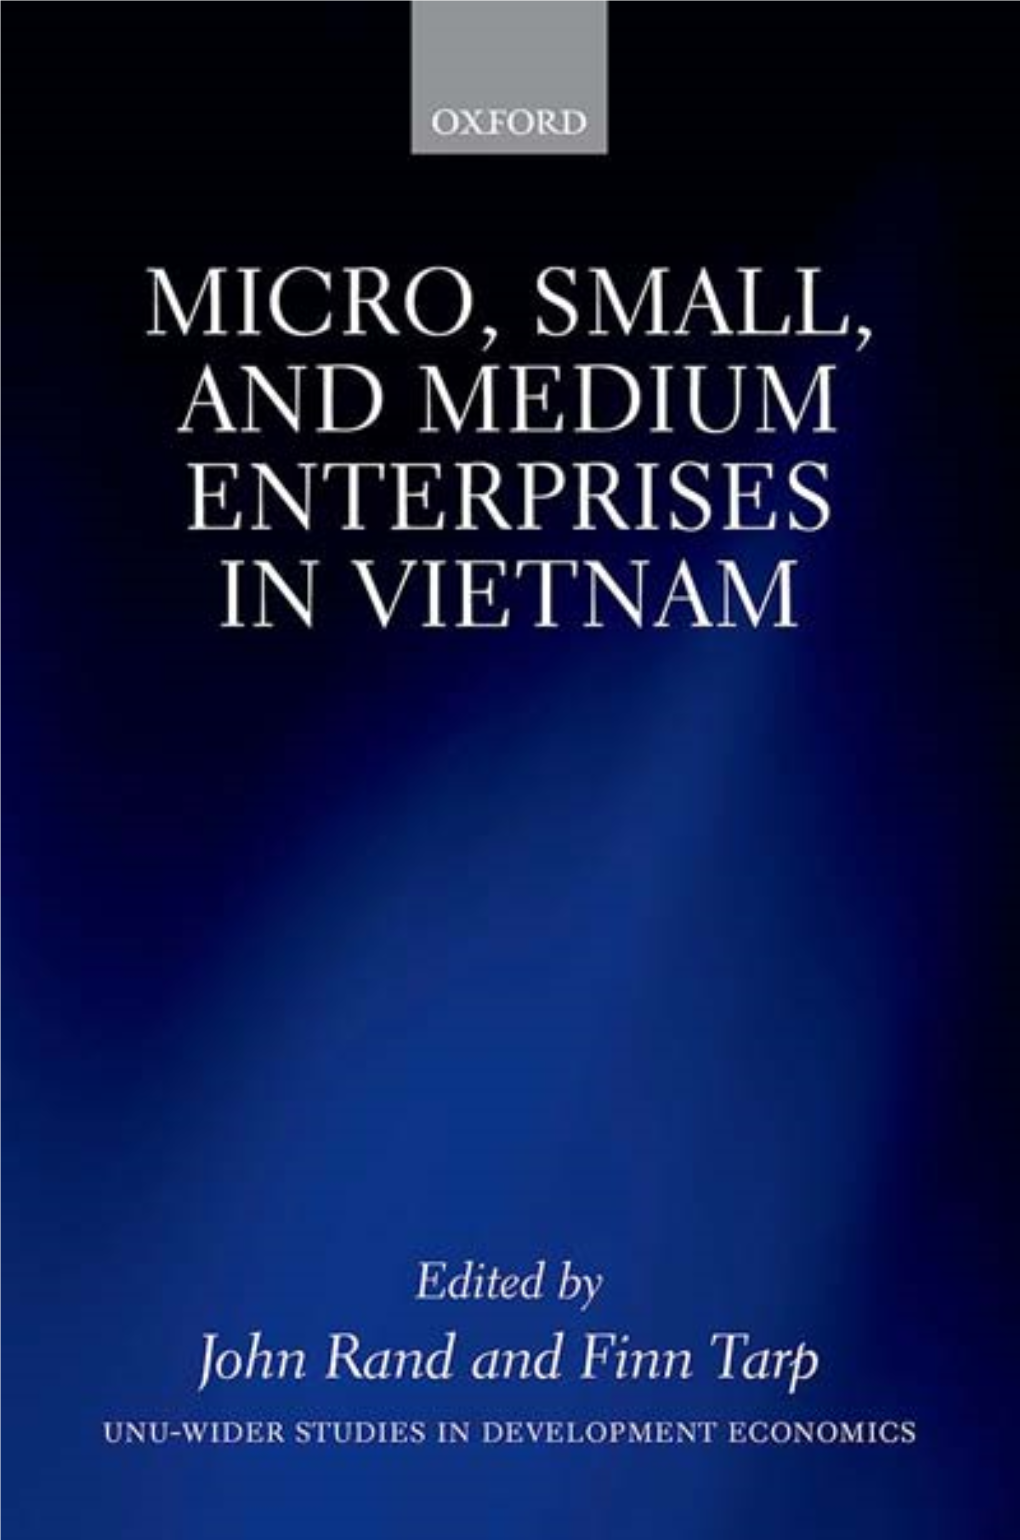 Micro, Small, and Medium Enterprises in Vietnam OUP CORRECTED PROOF – FINAL, 20/1/2020, Spi